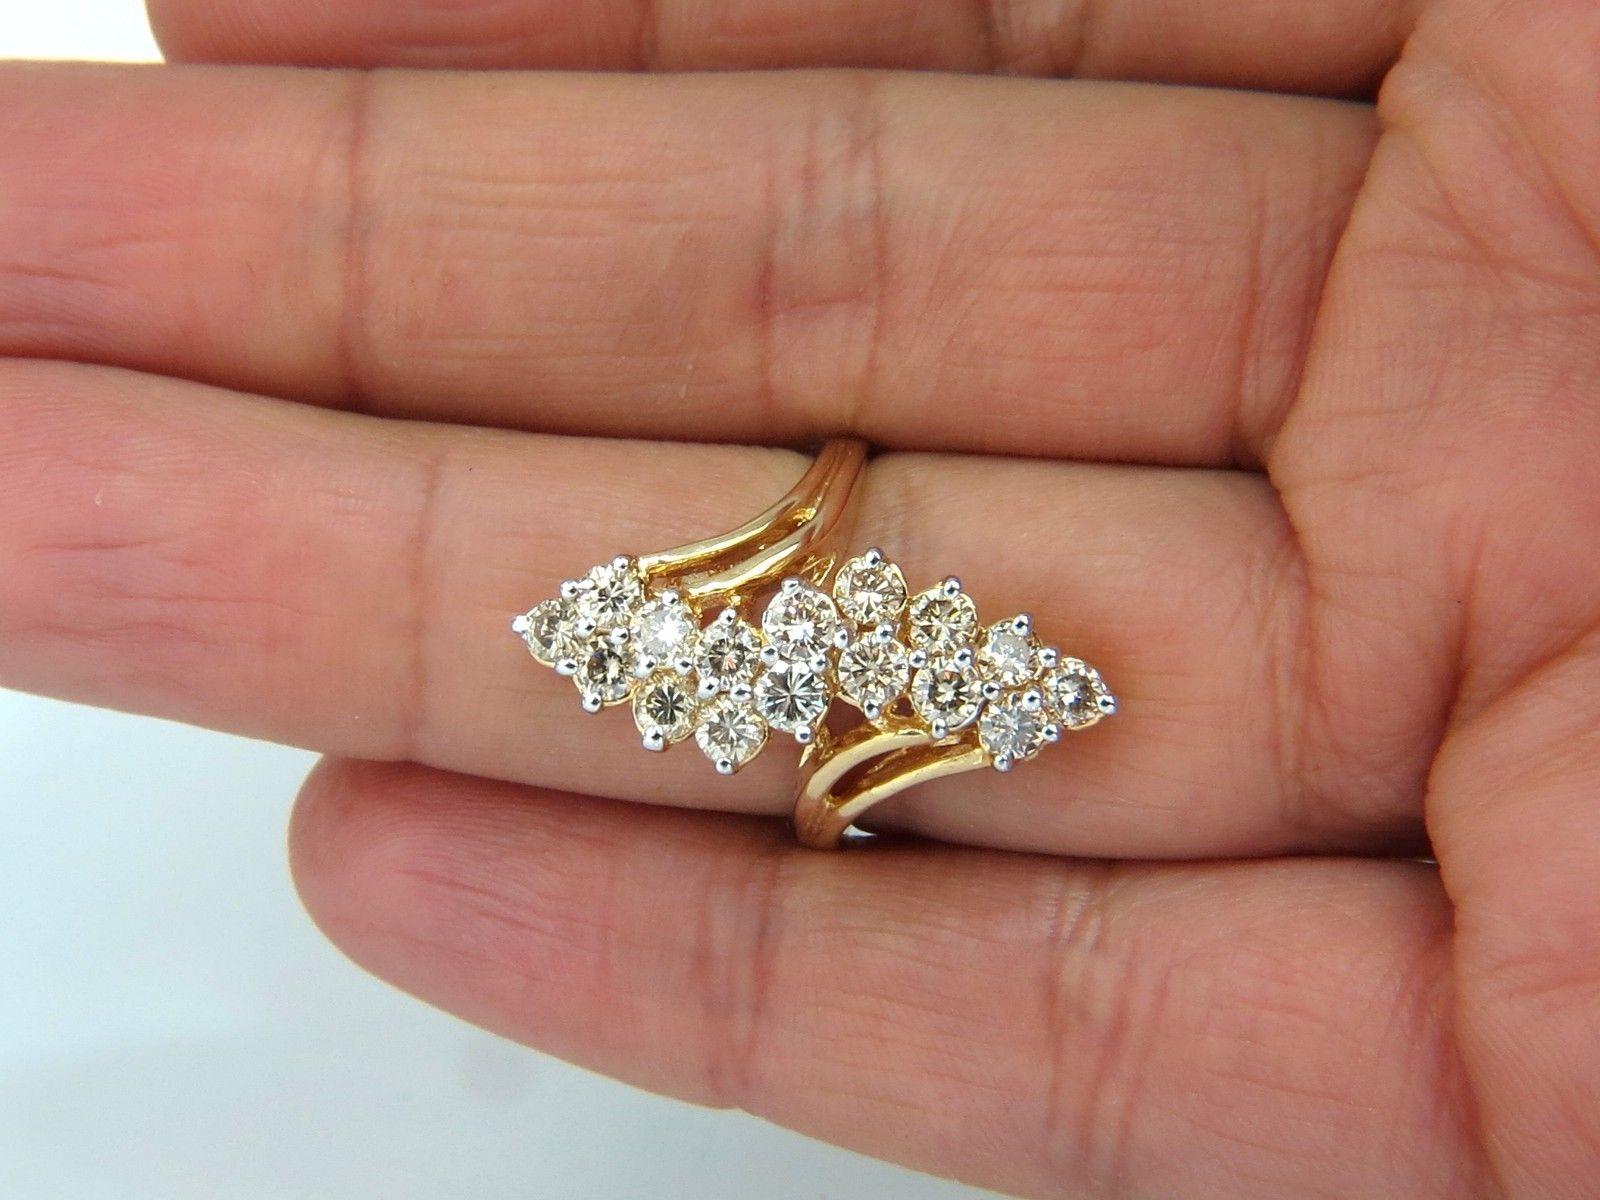 Rounds Cluster cocktail Prime.

2.00cts Natural diamonds Ring.

Full cut Brilliants

Vs-2  clarity / Fancy Light Brown Color.

14kt. yellow gold

8.1 grams.

current ring size: 8

May be resized, please inquire. 

Deck of ring: 1.1 x .40